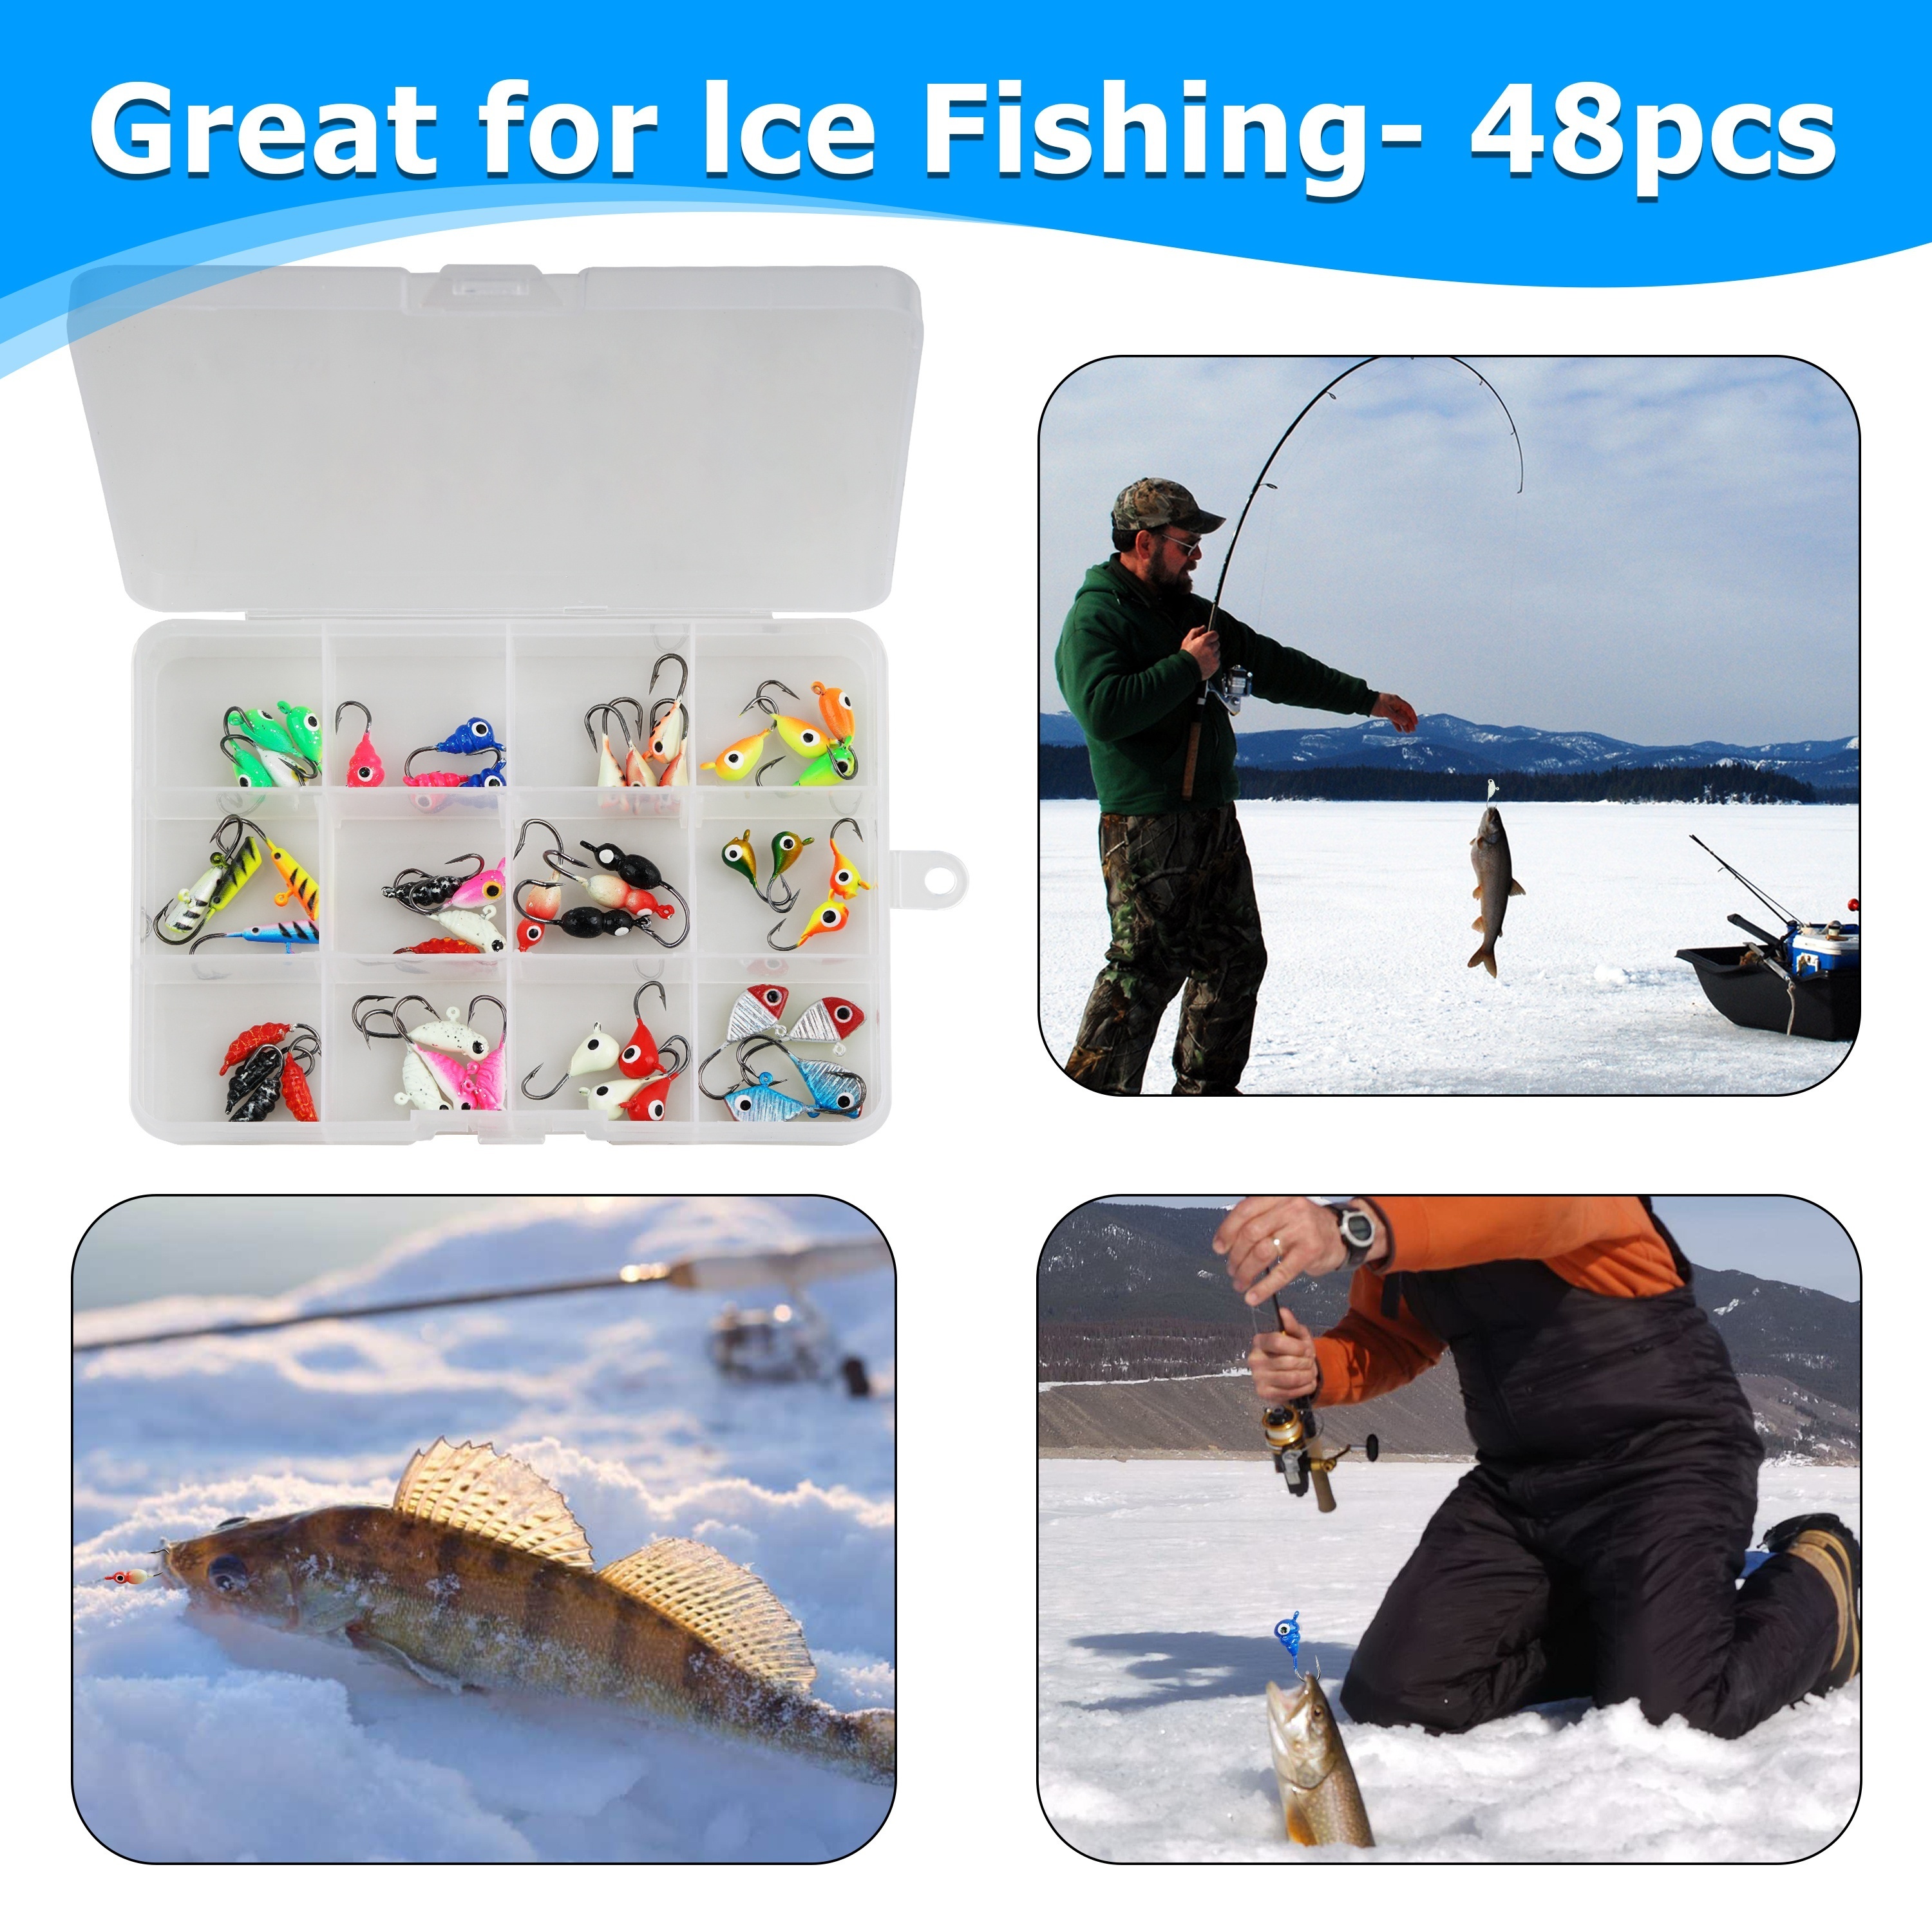 Ice Fishing Jig Box with Foam Insert for Bluegills, Crappie, Jumbo Perch,  Pike, Walleye, and More, Large - 280 Jig Spaces